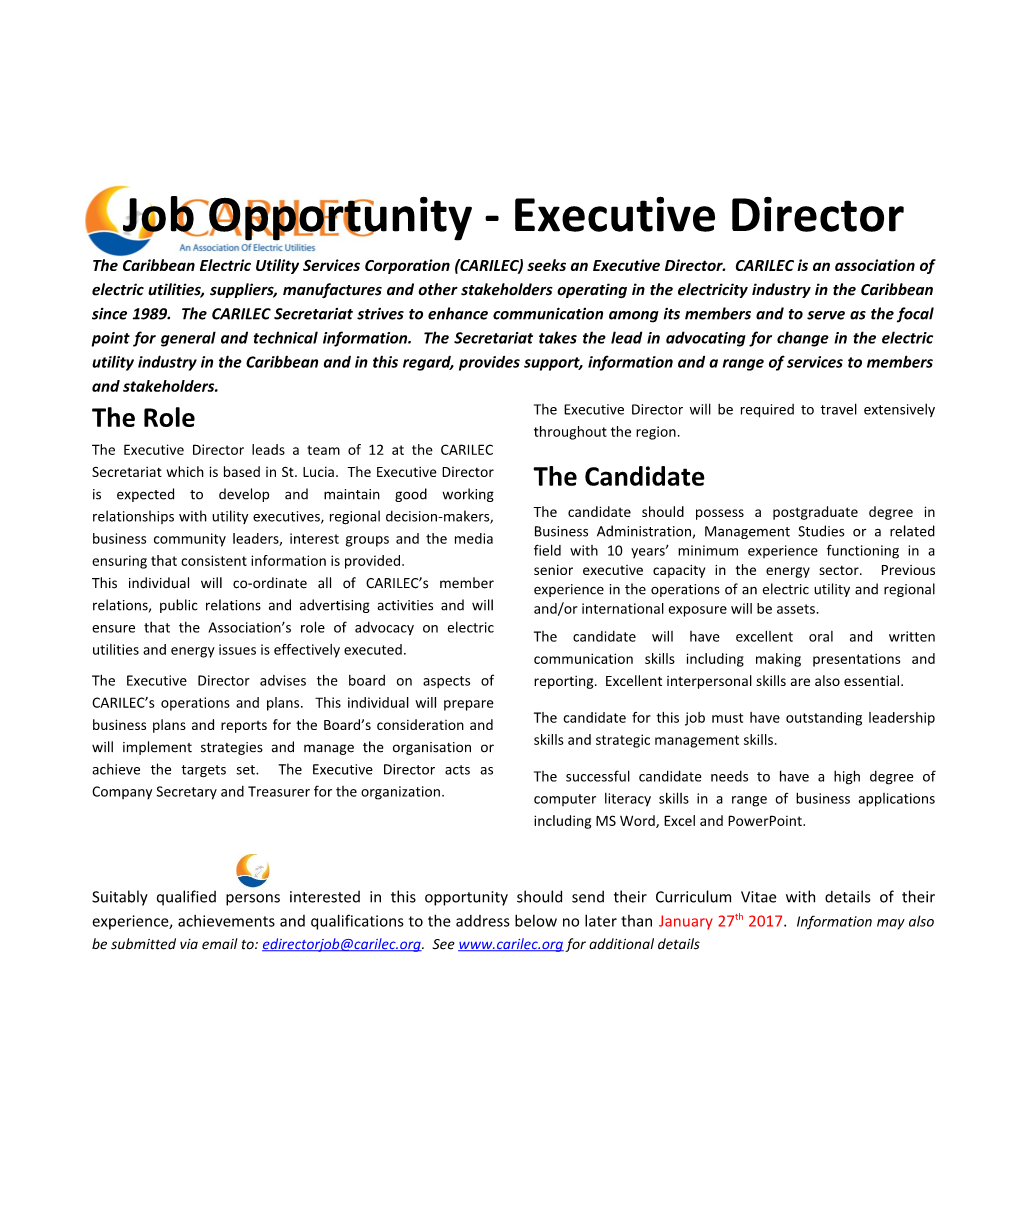 The Caribbean Electric Utility Services Corporation (CARILEC) Seeks an Executive Director